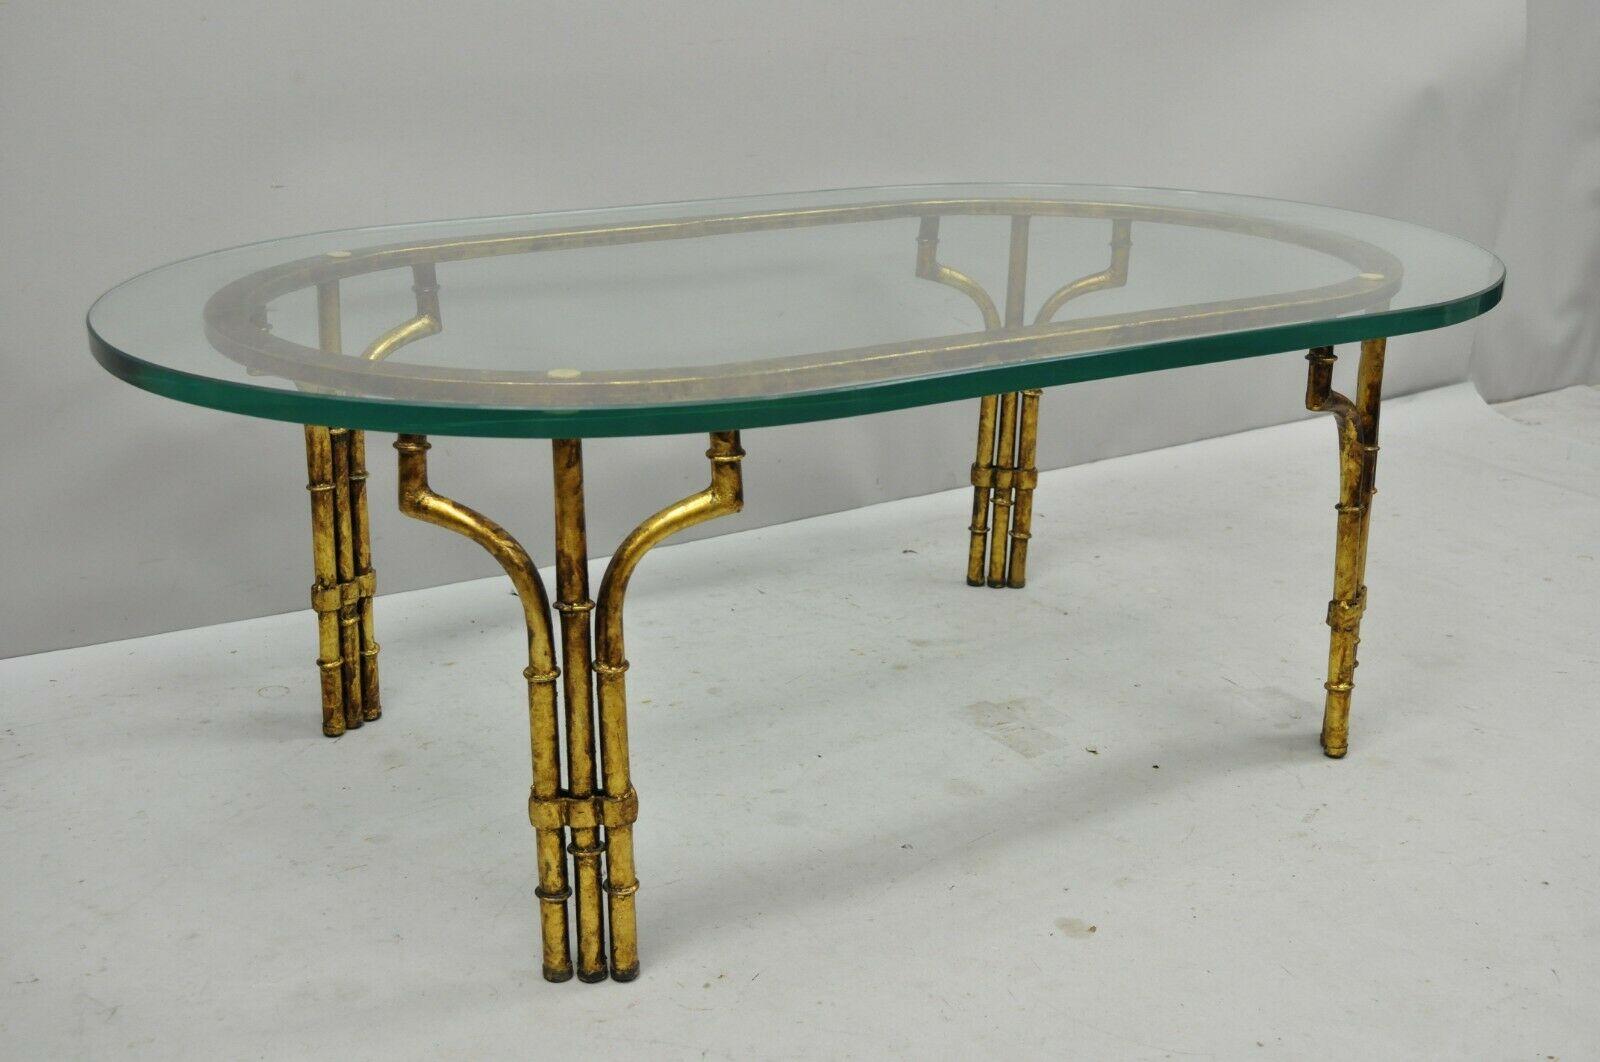 20th Century Italian Hollywood Regency Faux Bamboo Oval Glass Gold Gilt Iron Coffee Table